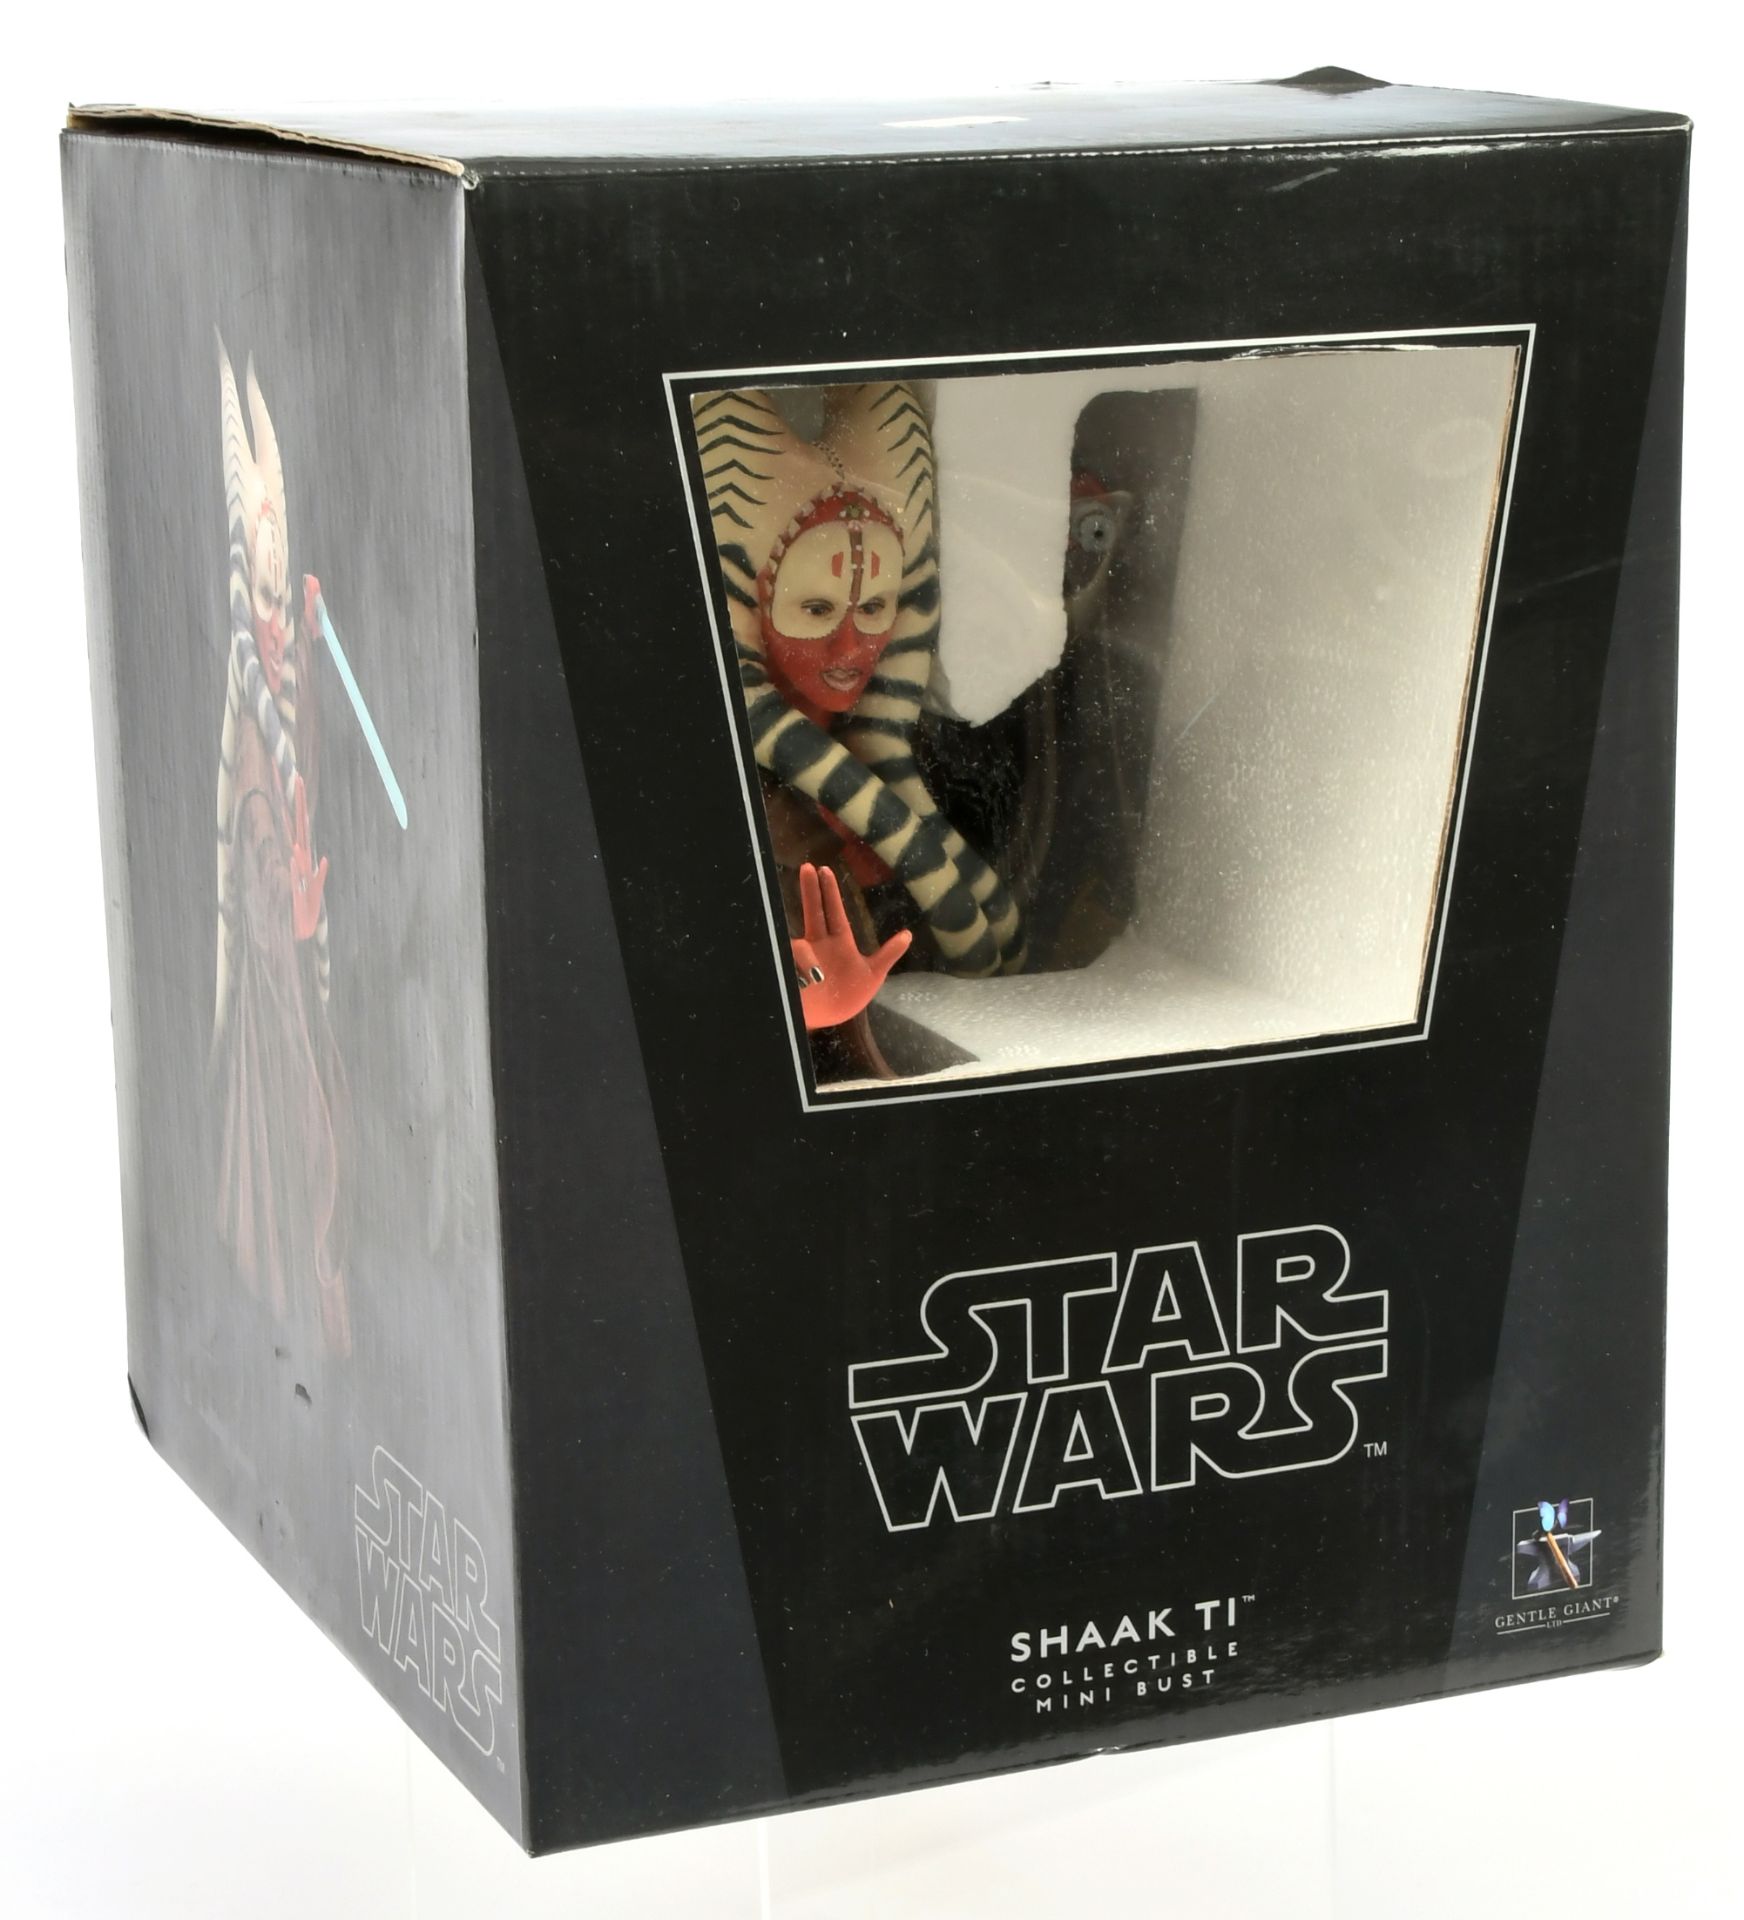 Gentle Giant Star Wars Attack Of The Clones Shaak Ti collectible mini bust